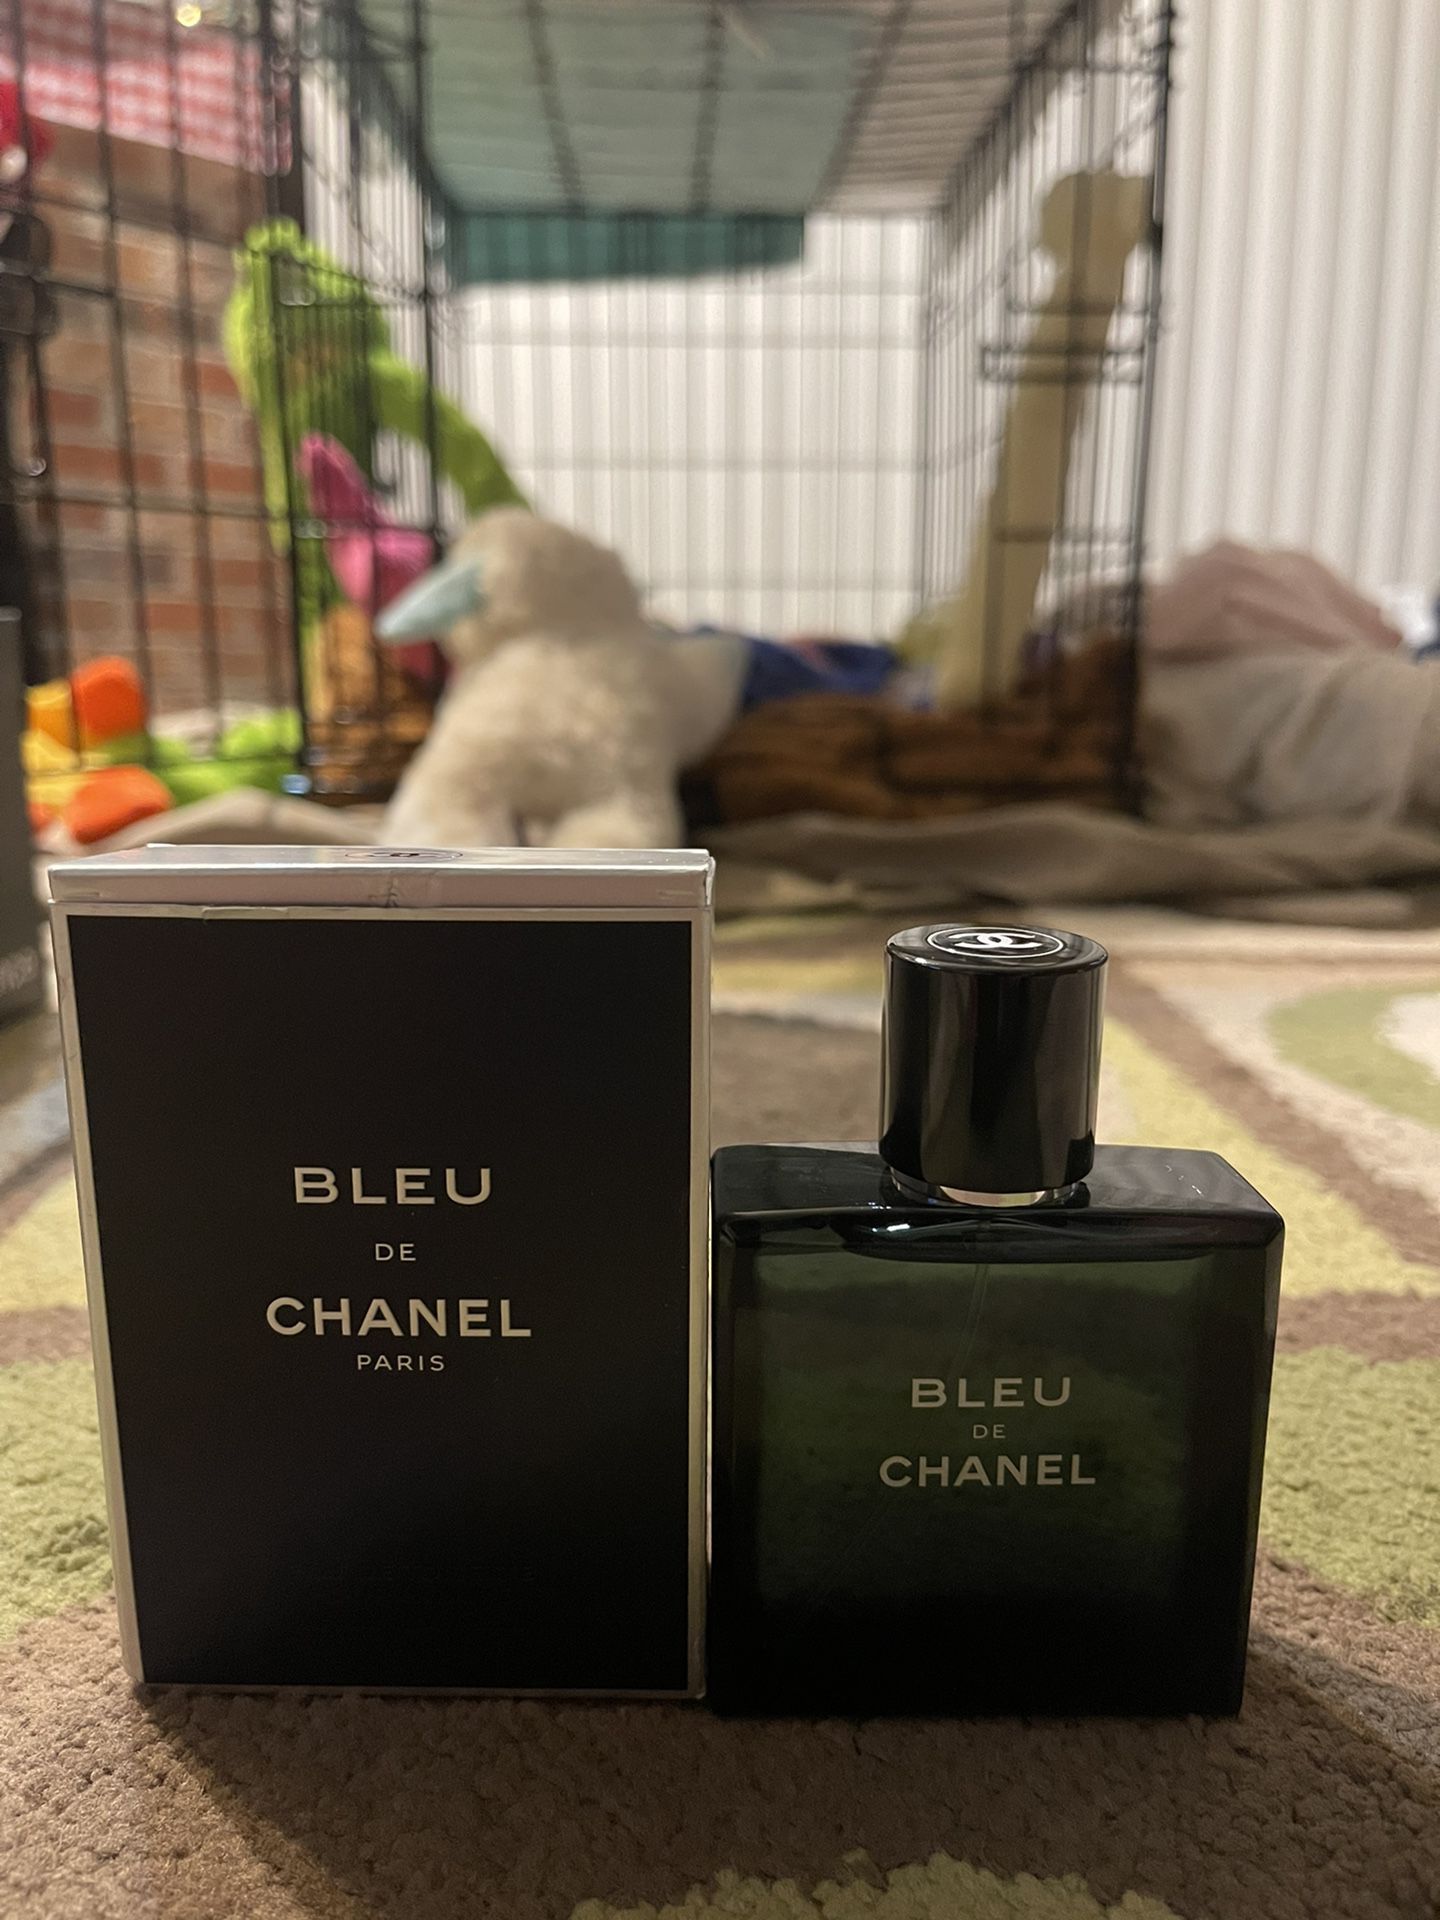 BLEU DE CHANEL PARIS 50 Ml  Made in France for your boy it reminds  me for Sale in Seattle, WA - OfferUp